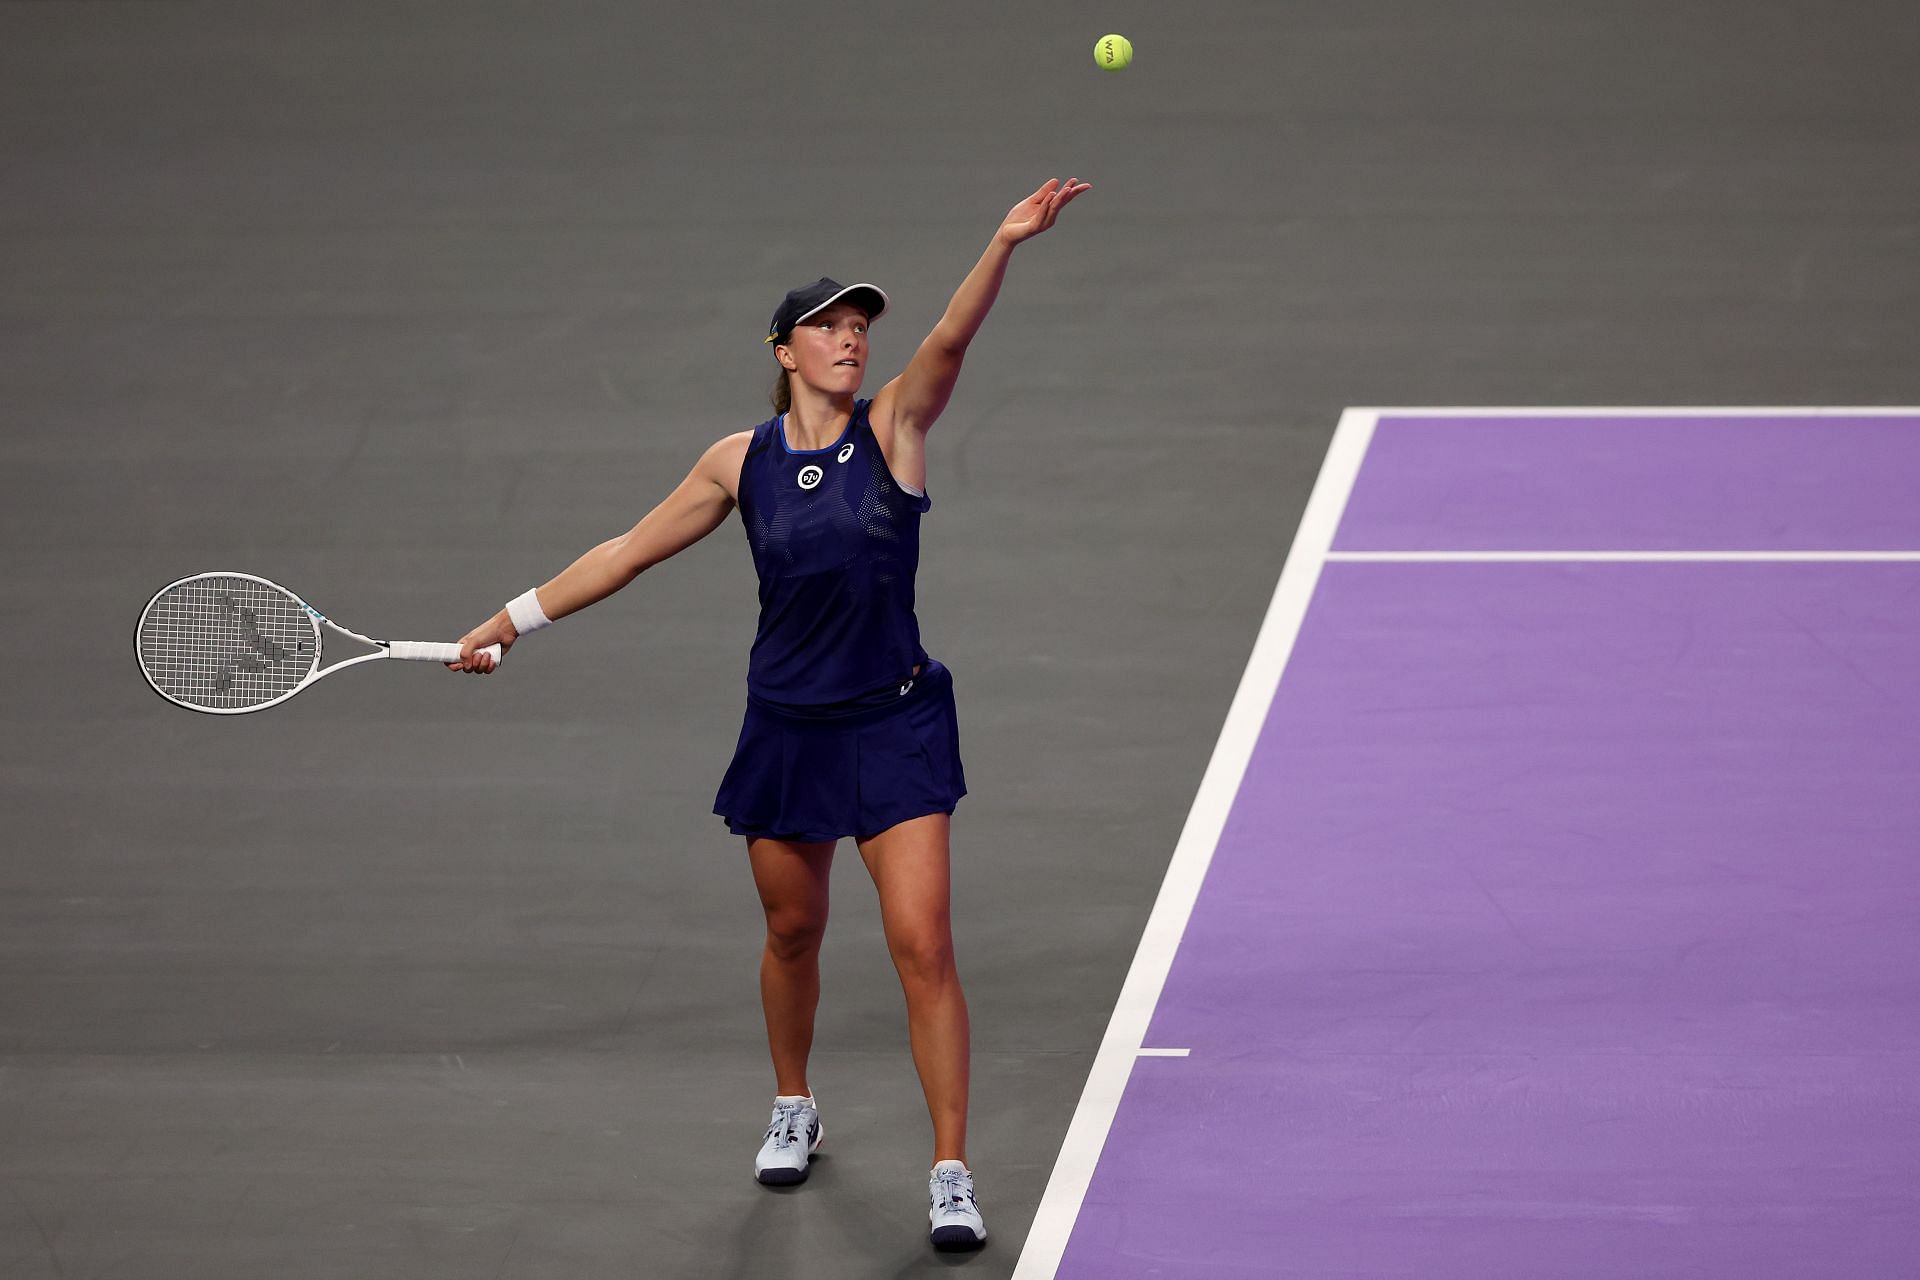 WTA Finals 2022 Schedule Today TV Schedule, start time, order of play, live stream details and more Day 4